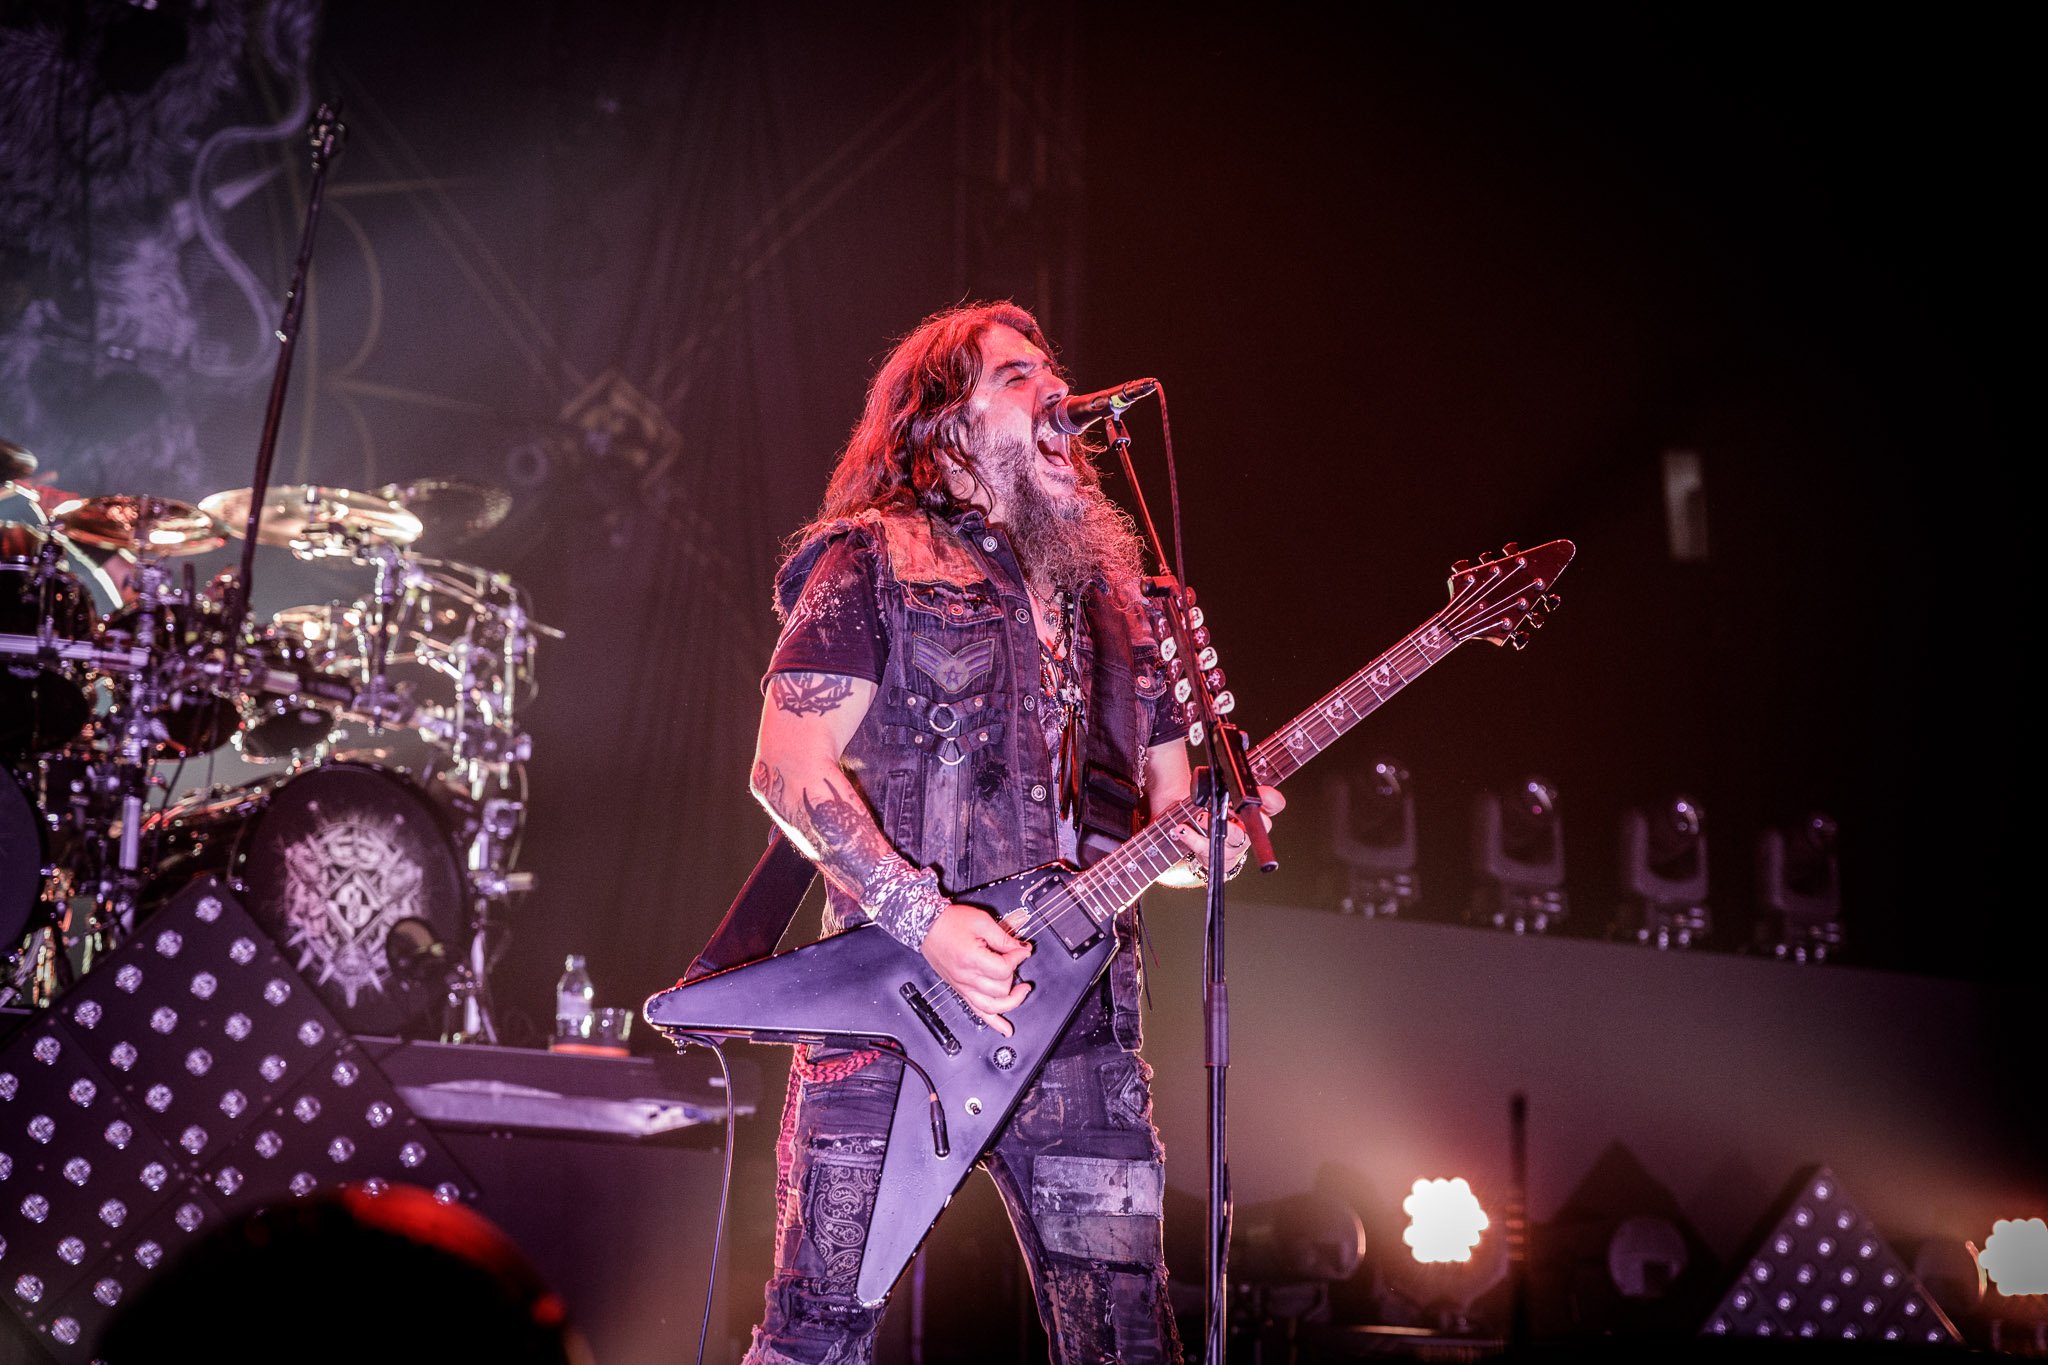 Machine Head at the AO Arena in Manchester on September 12th 202